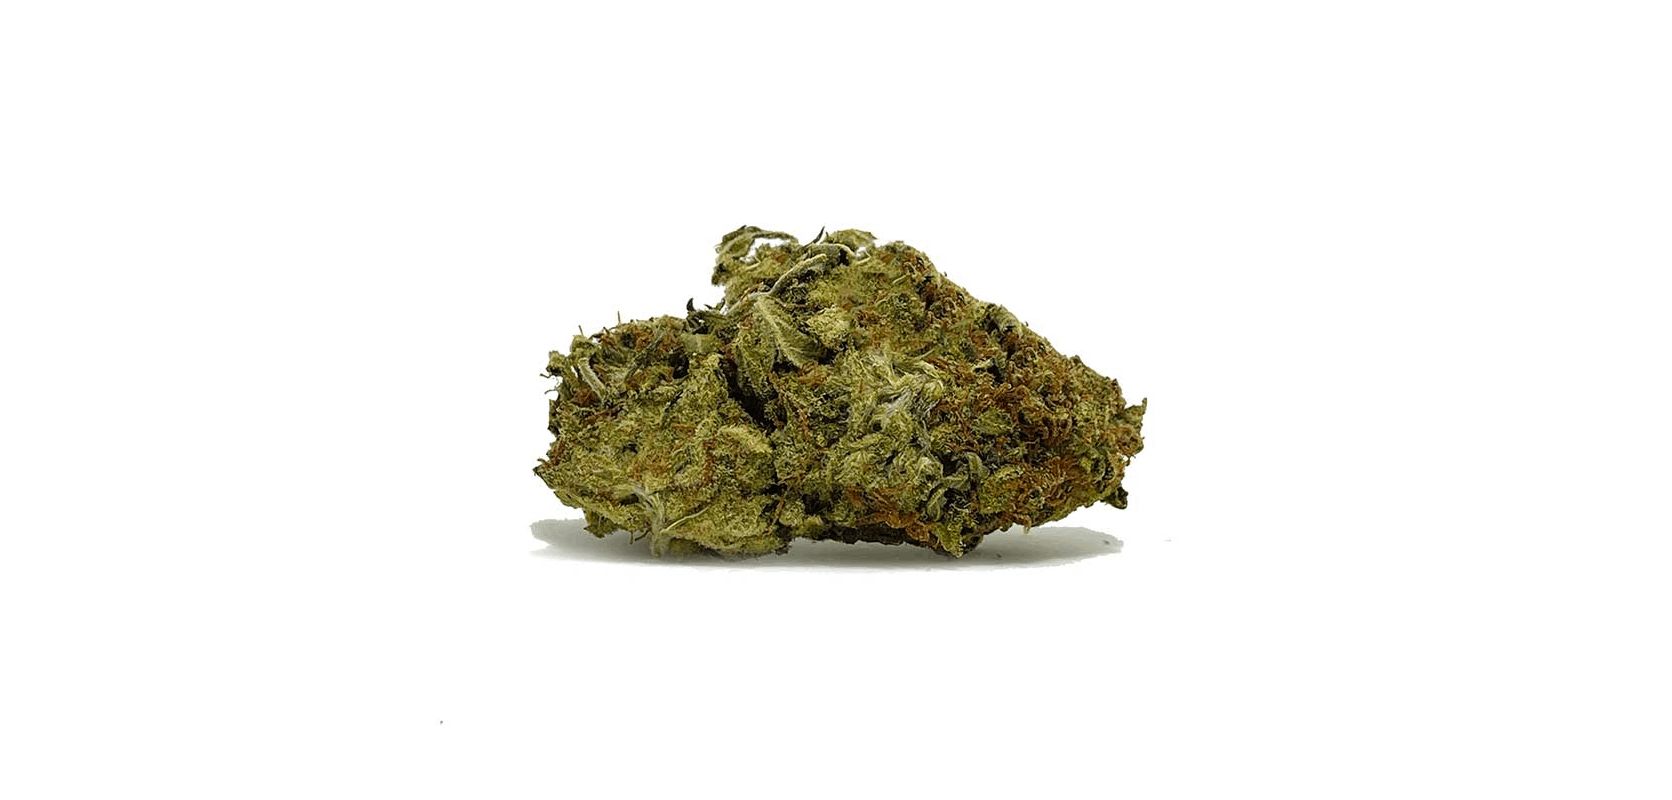 Gorilla Bomb strain has quite a visually striking appearance. As is typical of sativa-leaning strains, this bud has small to medium, spade-shaped fluffy nugs.